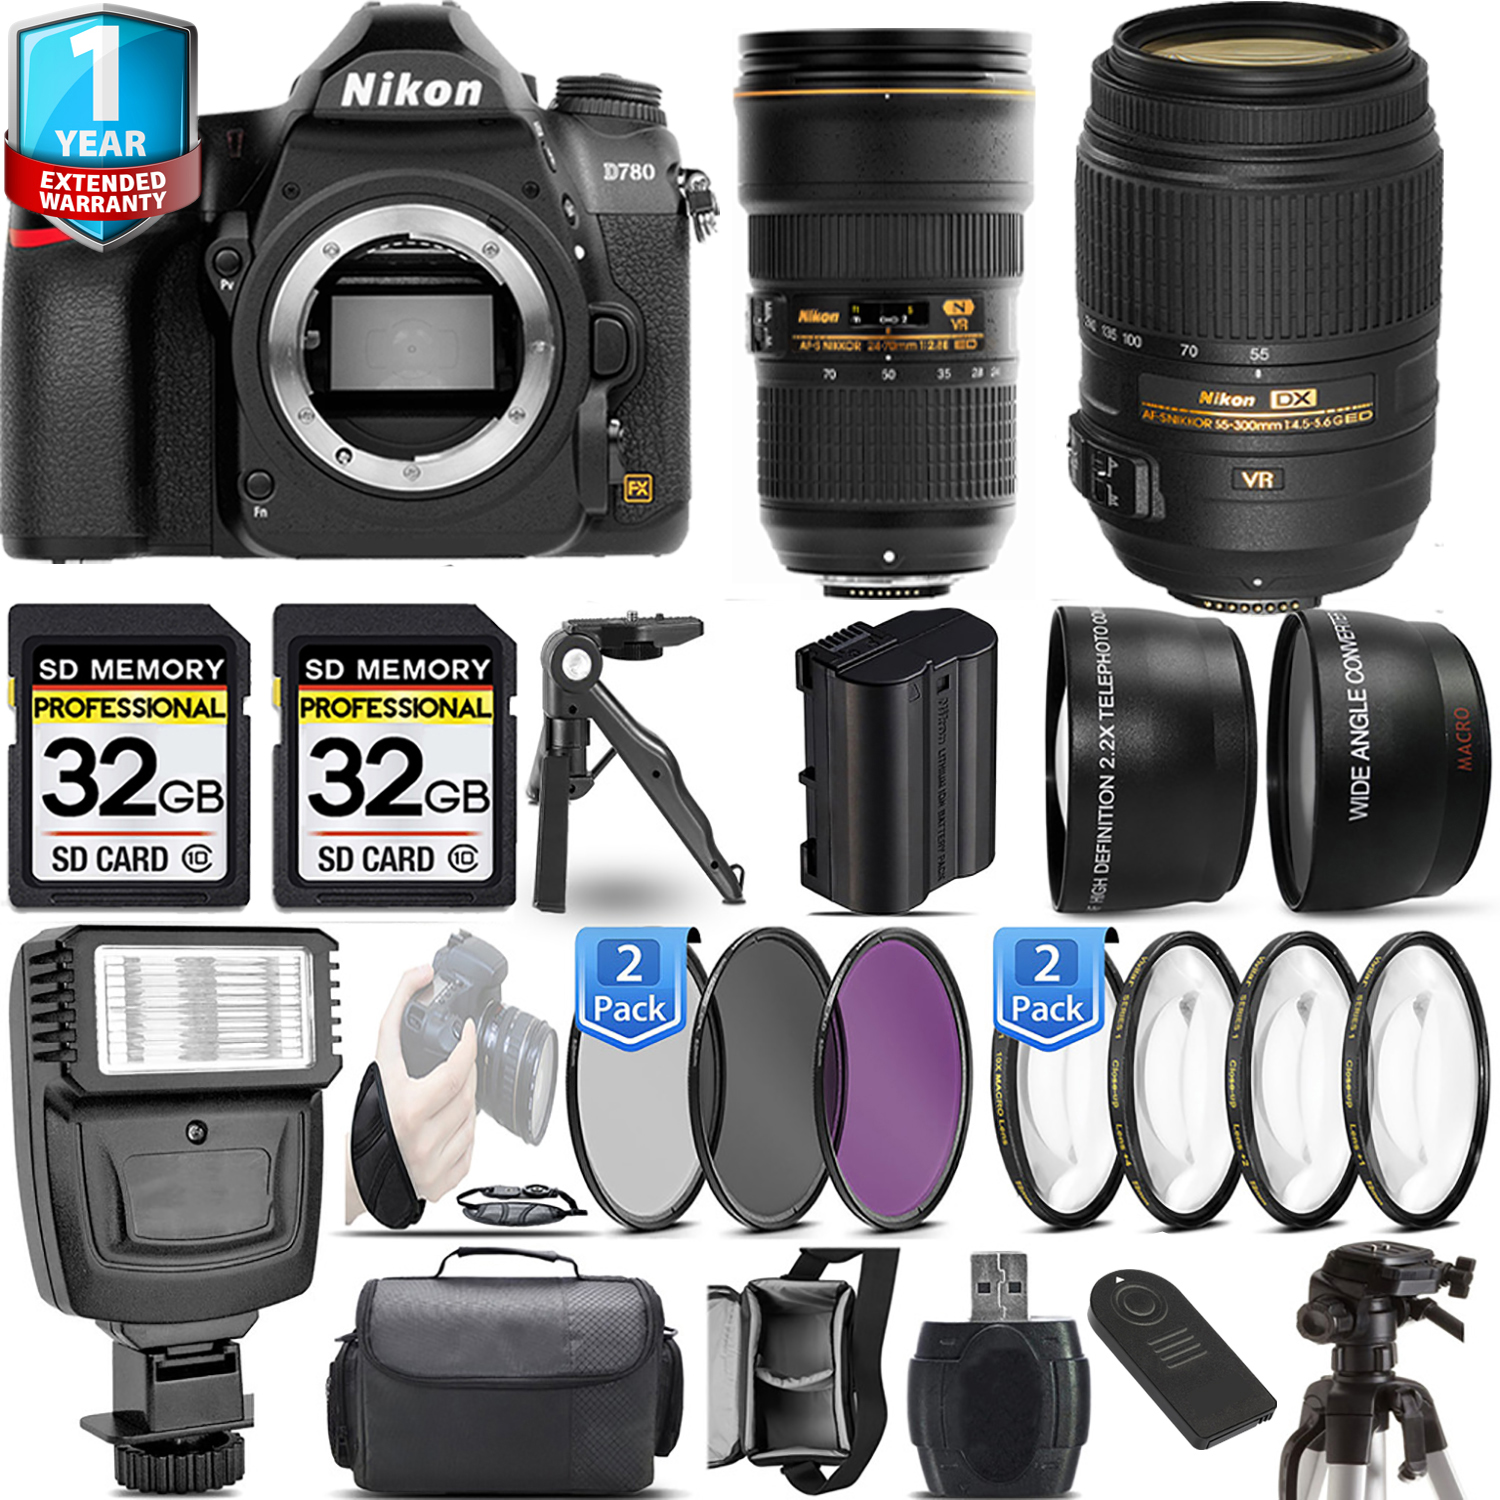 D780 DSLR Camera Camera + 55- 300mm + 24-70mm + 1 Year Extended Warranty + 64GB Basic Kit *FREE SHIPPING*